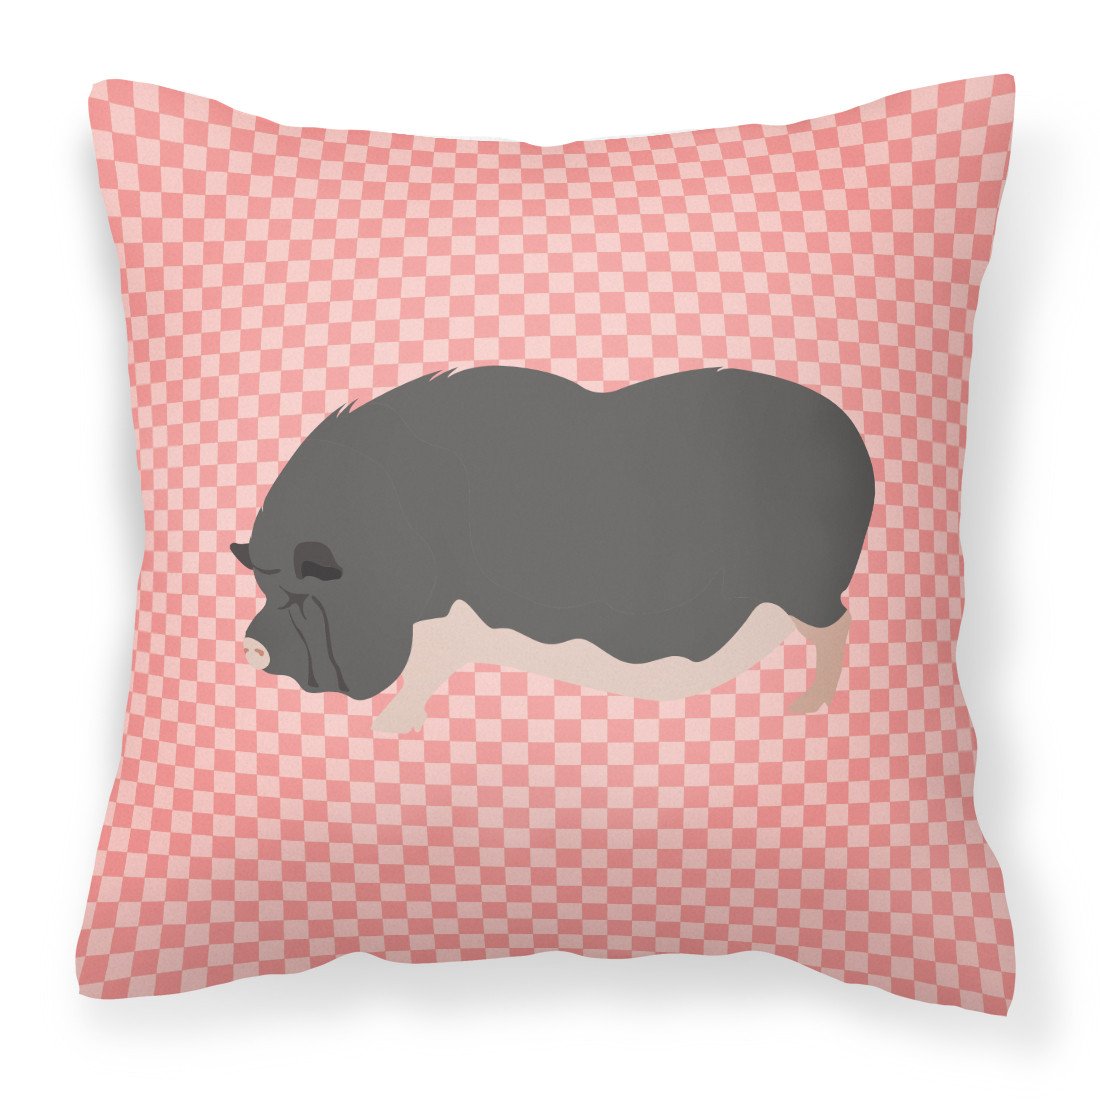 Vietnamese Pot-Bellied Pig Pink Check Fabric Decorative Pillow BB7941PW1818 by Caroline's Treasures